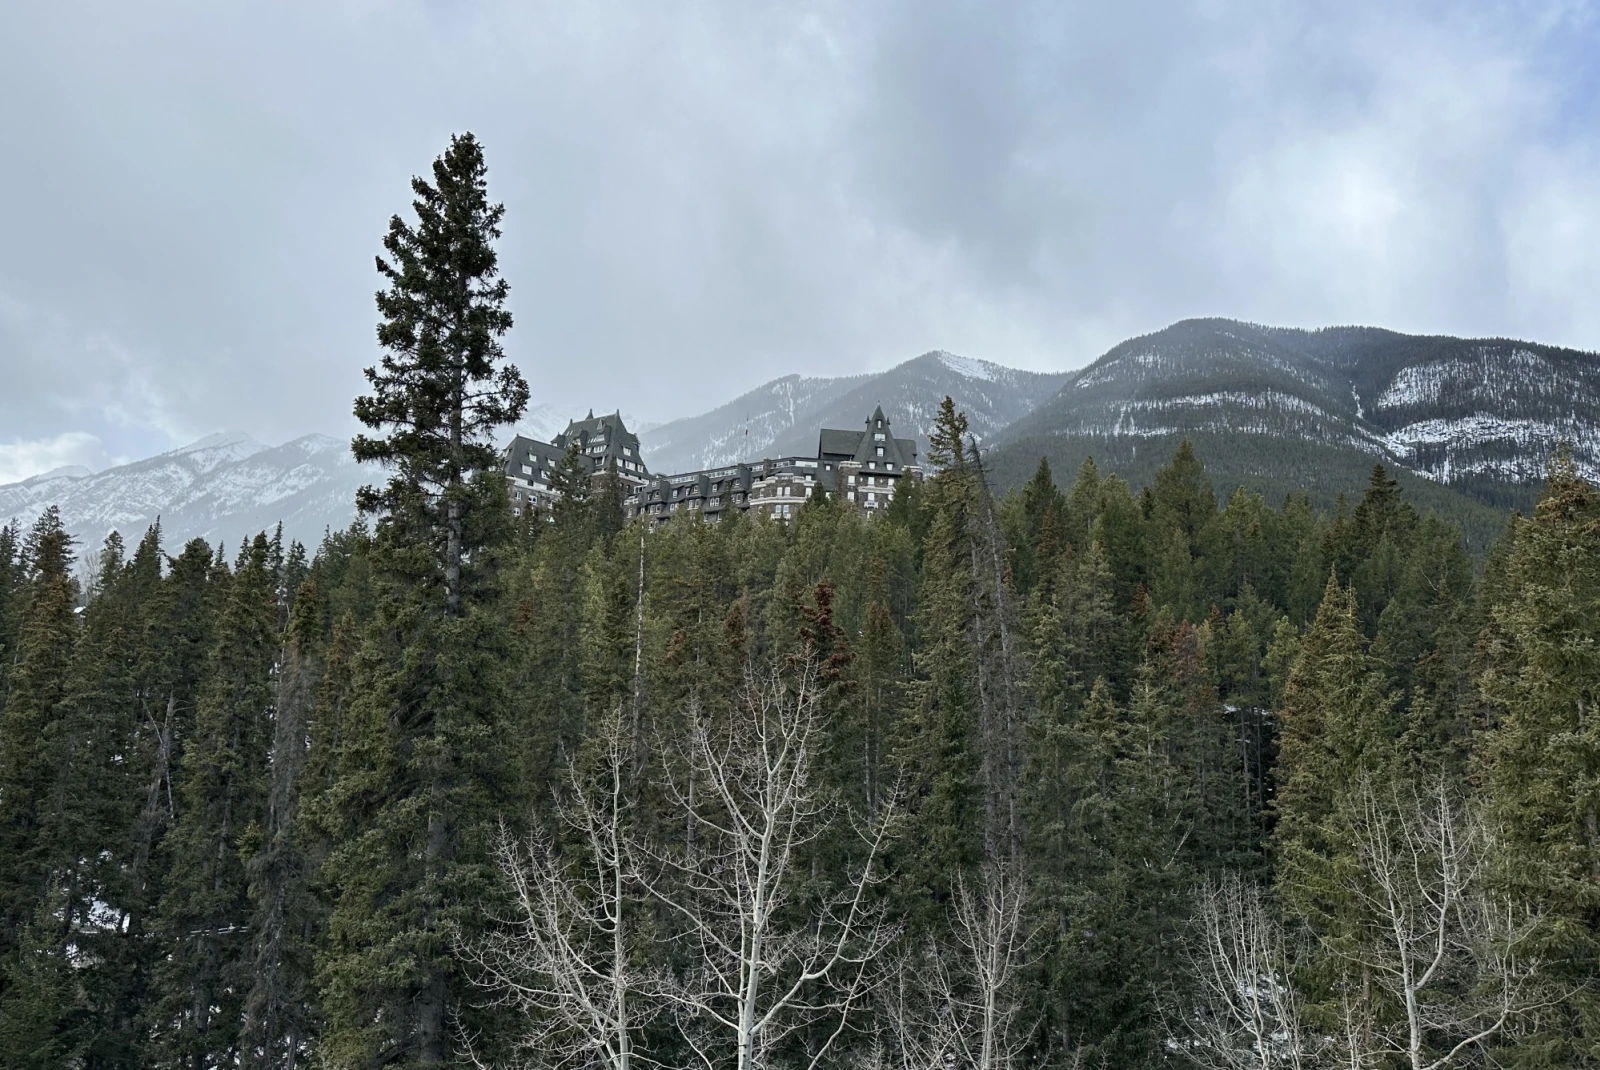 a lodge hotel at the top of a tree covered mountain, with snowy mountains in the distance on a cloudy winter day